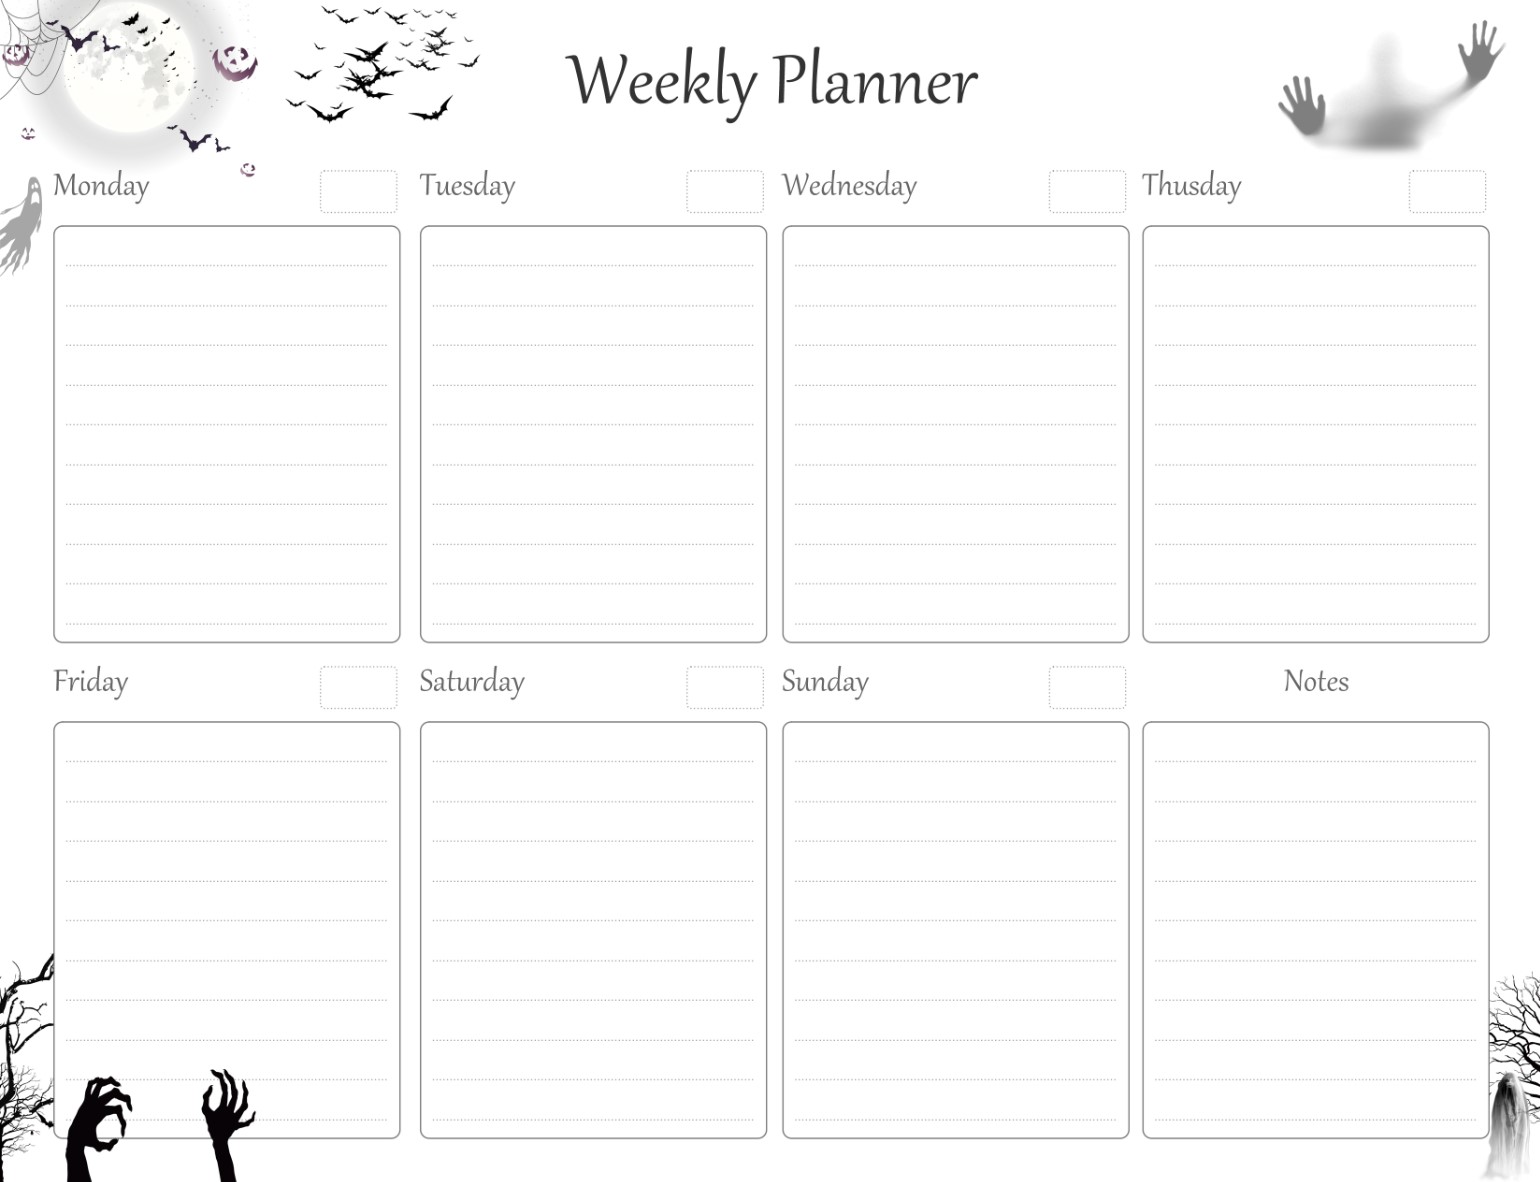 Halloween Weekly Planner Work, US Letter Planner to resize, Insert Printable Planner, Instant Download